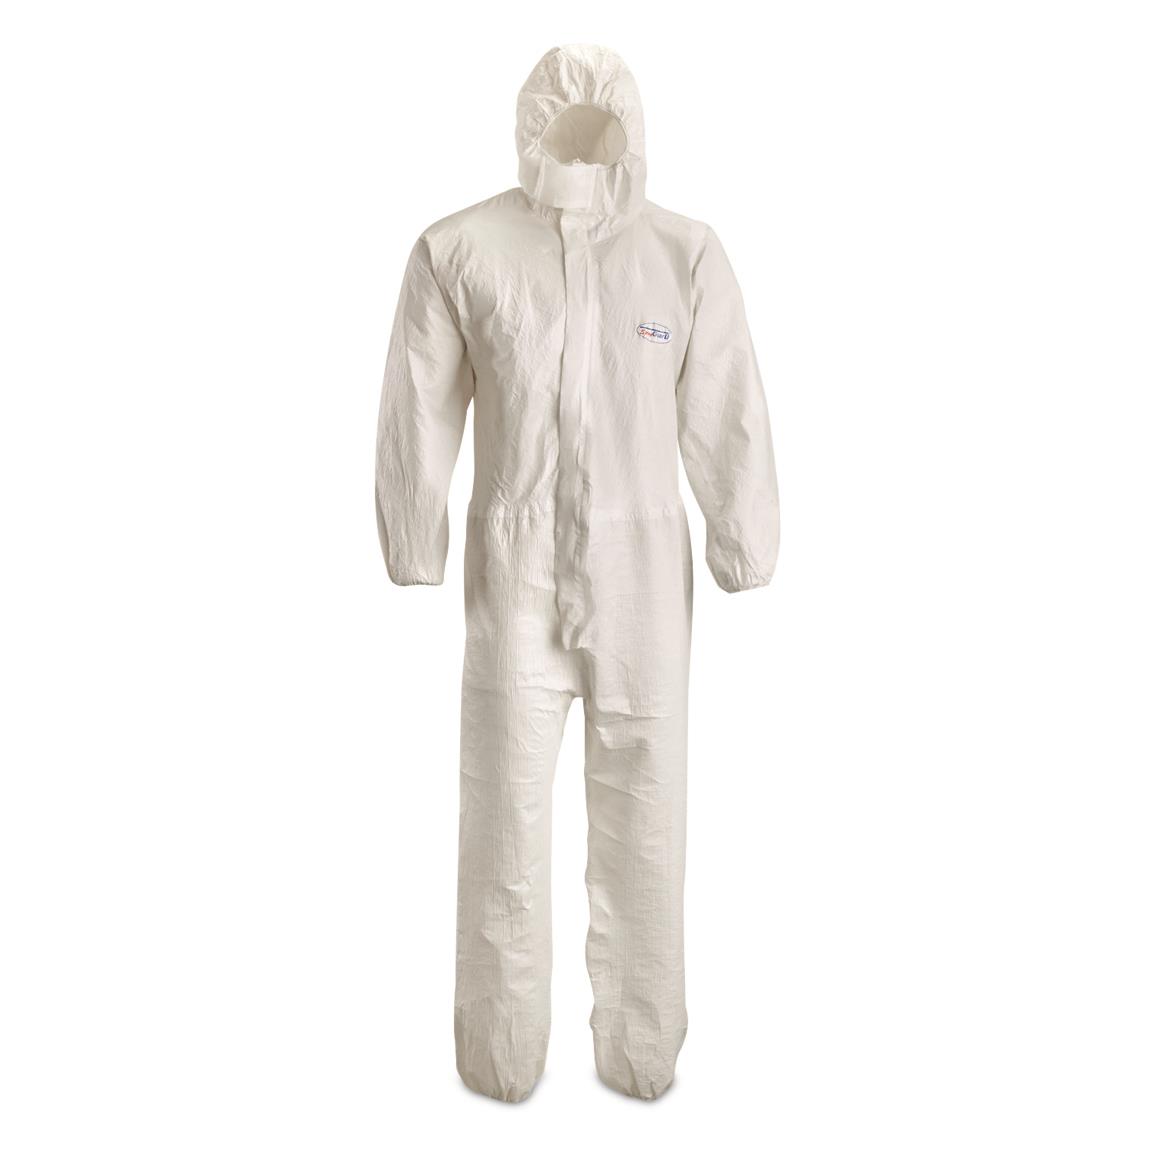 U.S. Military Chemical Protection Suit coveralls